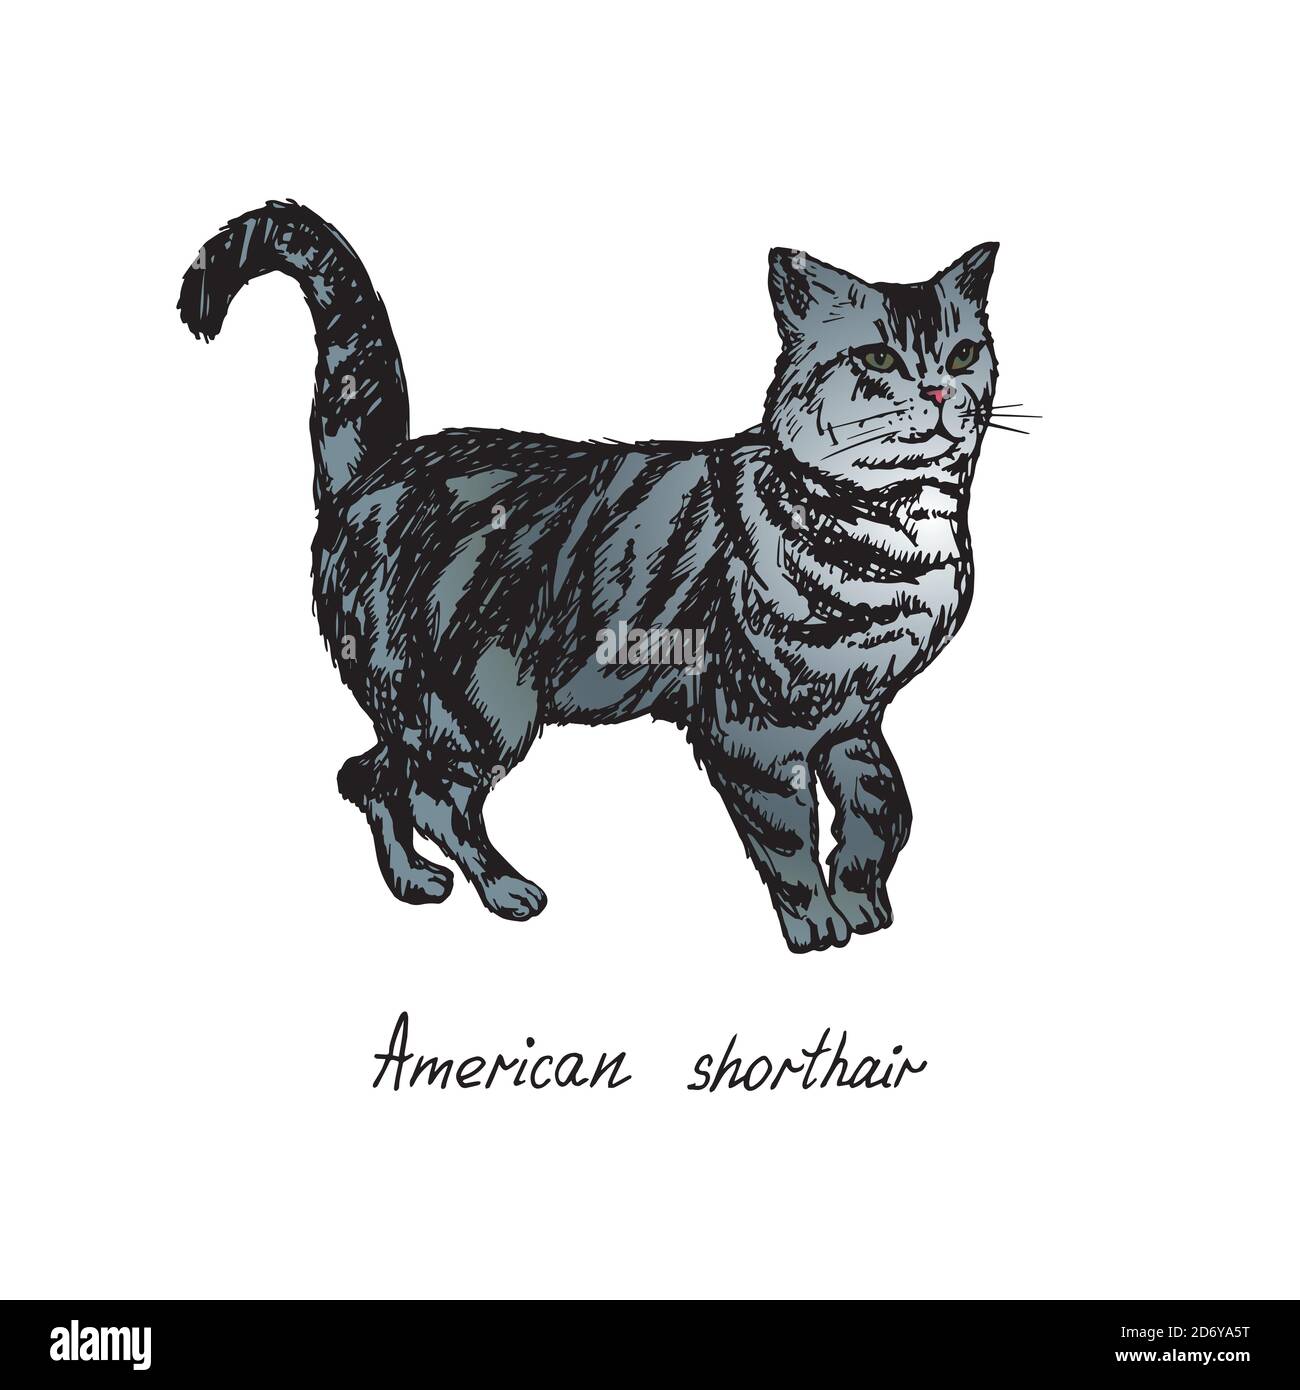 American shorthair, cat breeds illustration with inscription, hand drawn  colorful doodle, sketch Stock Photo - Alamy